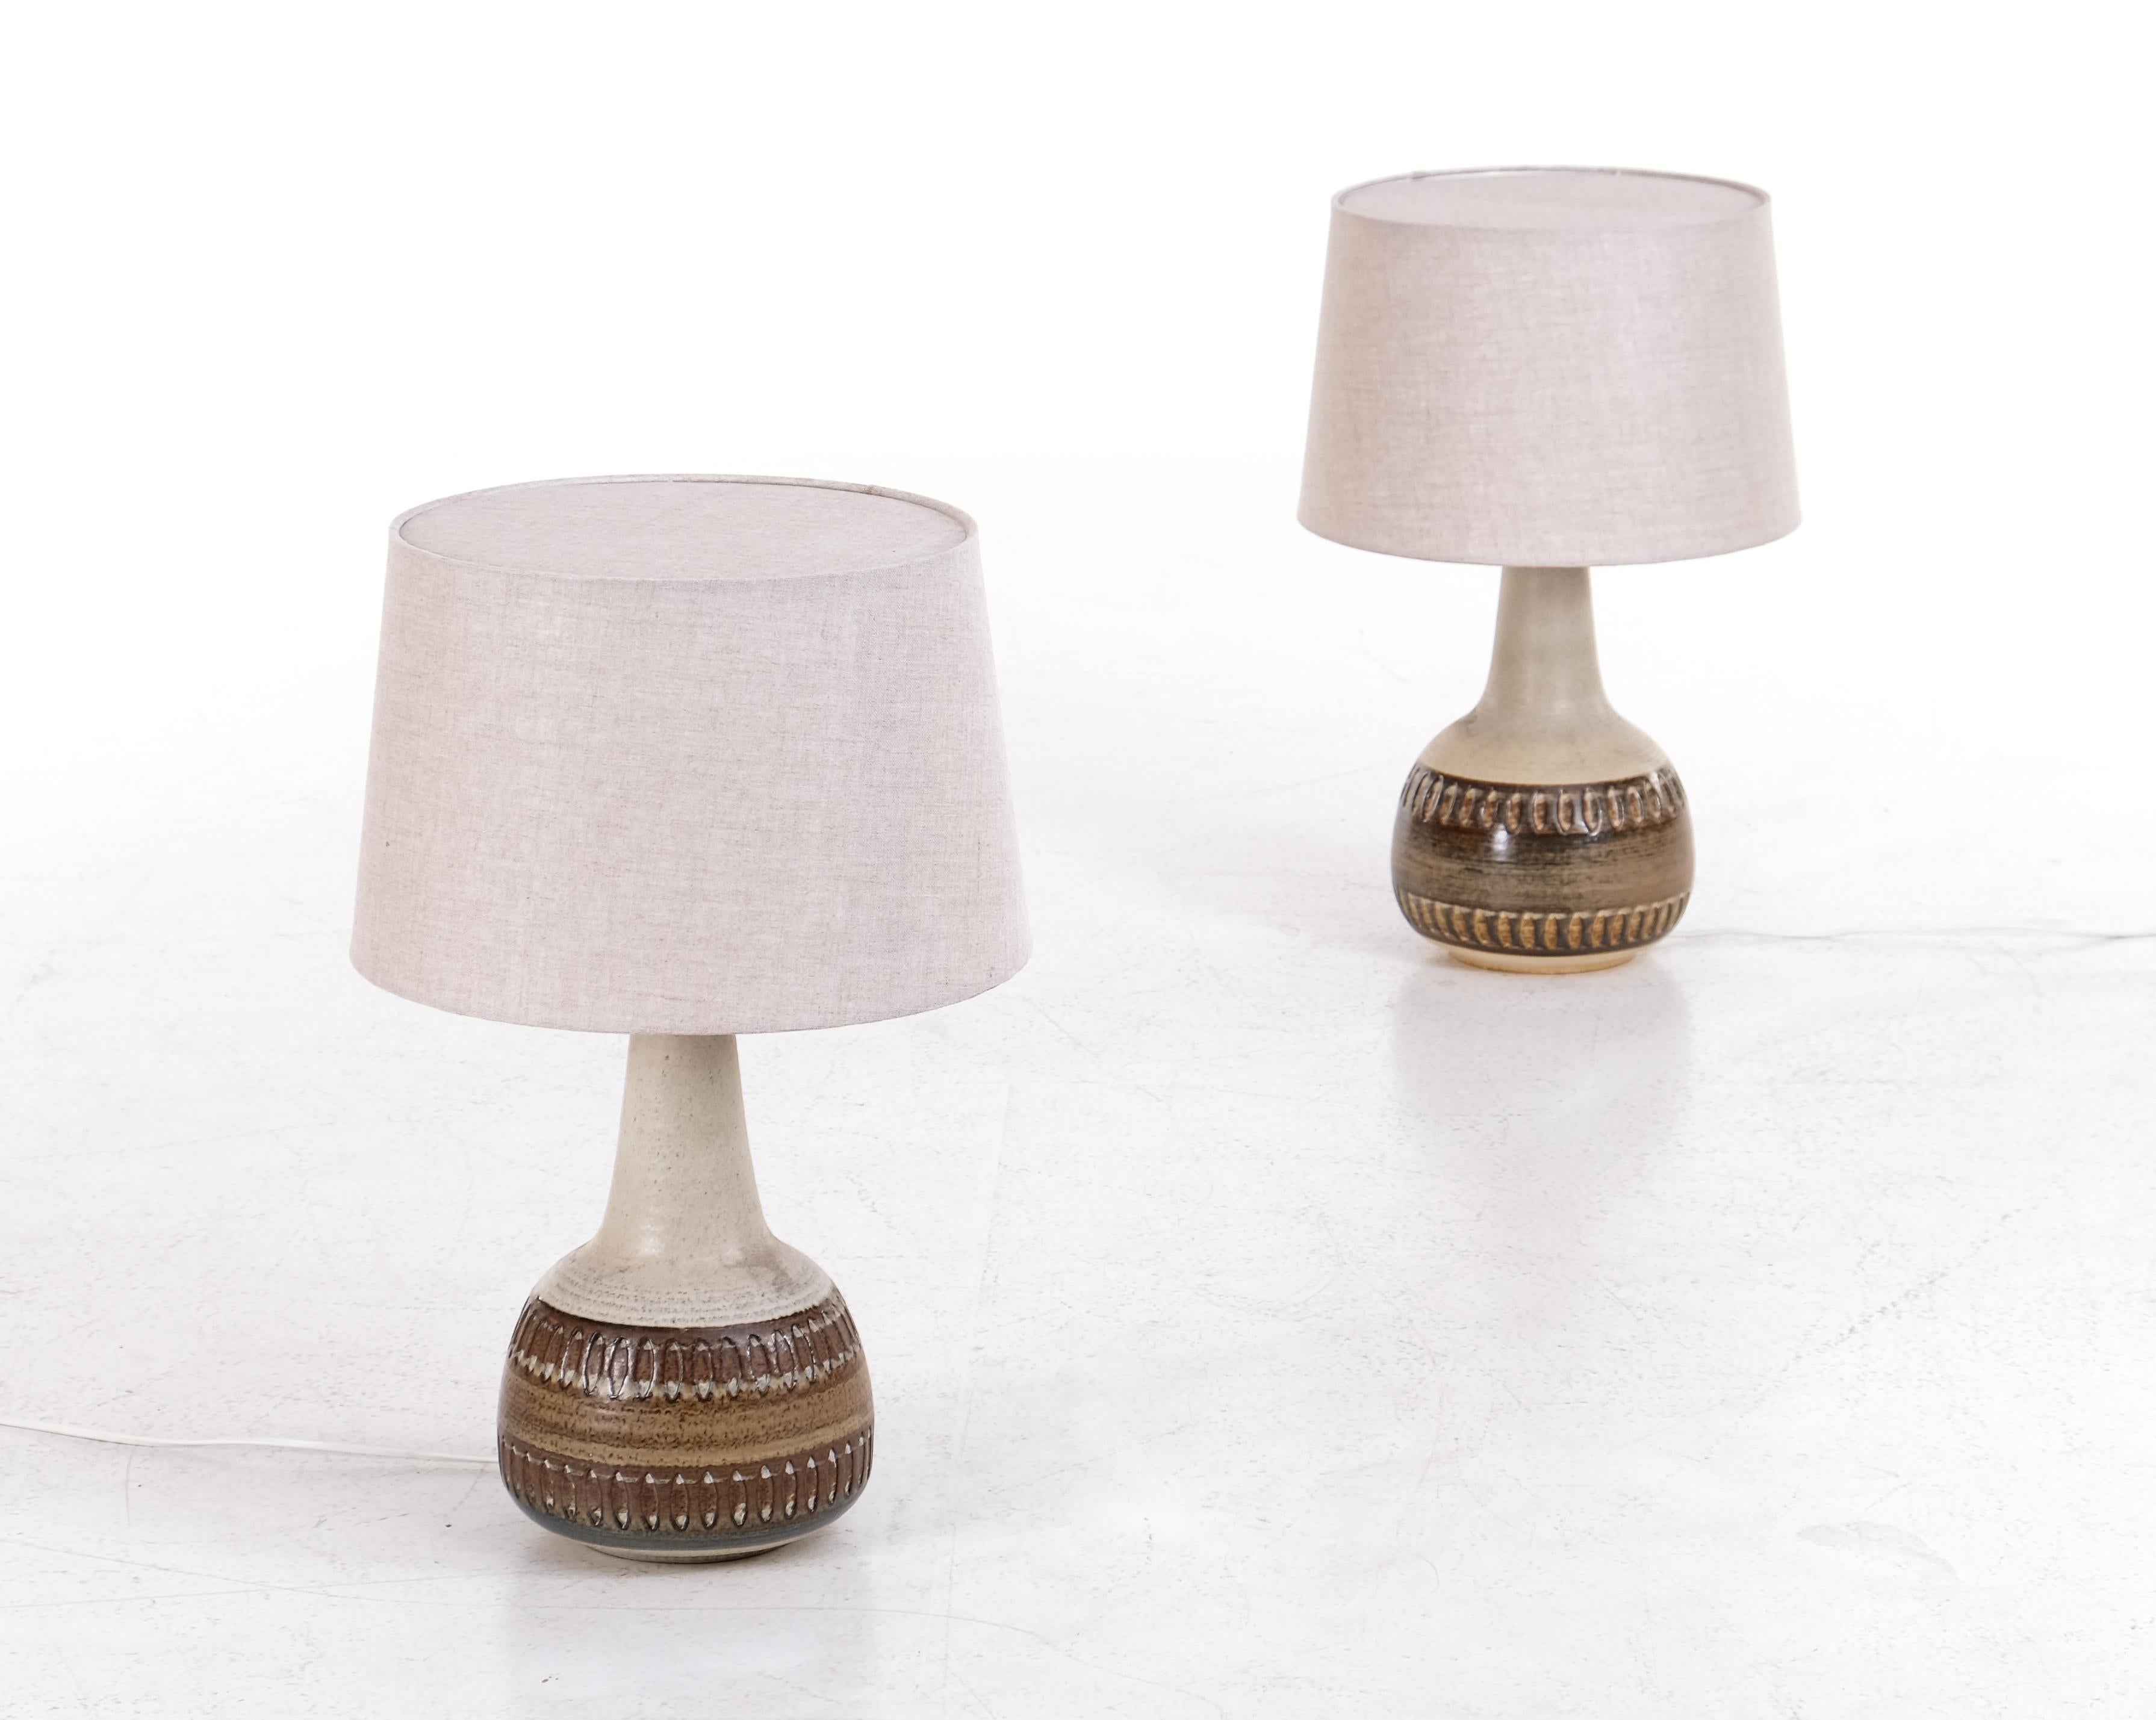 Scandinavian Modern Pair of Table Lamps by Søholm Keramik, Denmark, 1960s For Sale